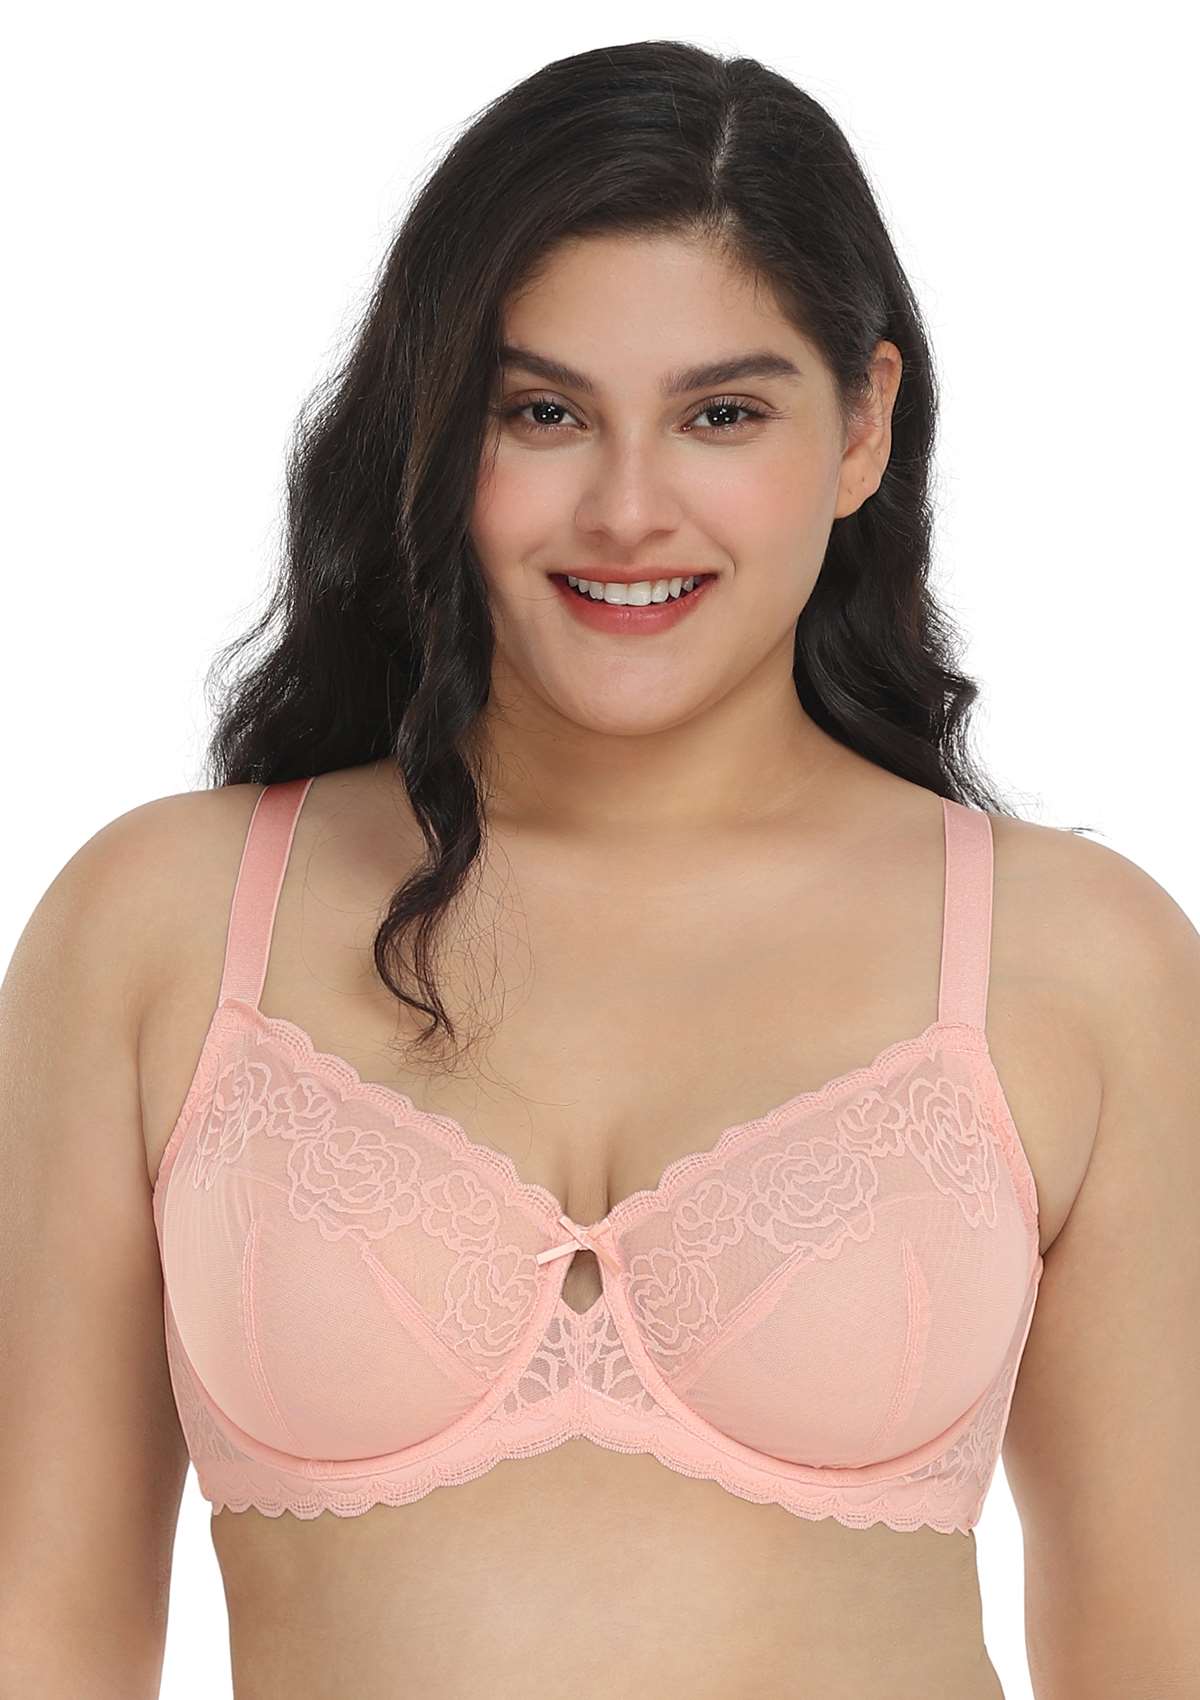 HSIA Rosa Bonica Sheer Lace Mesh Unlined Thin Comfy Woman Bra - Pink / 36 / DDD/F